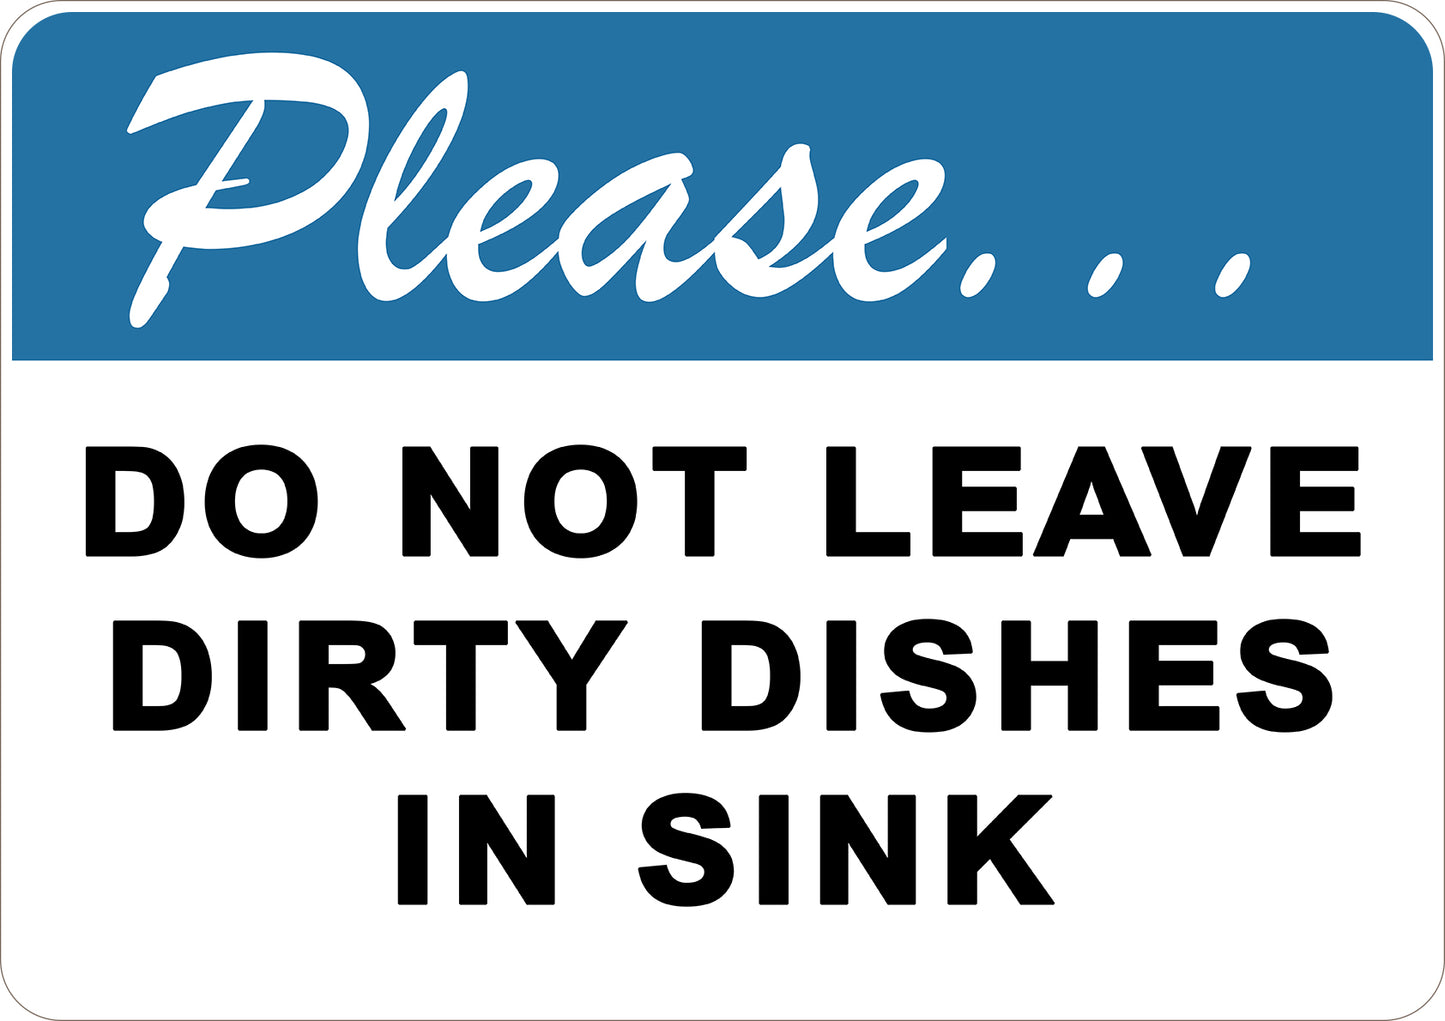 Do Not Leave Dirty Dishes In Sink Printed Sign